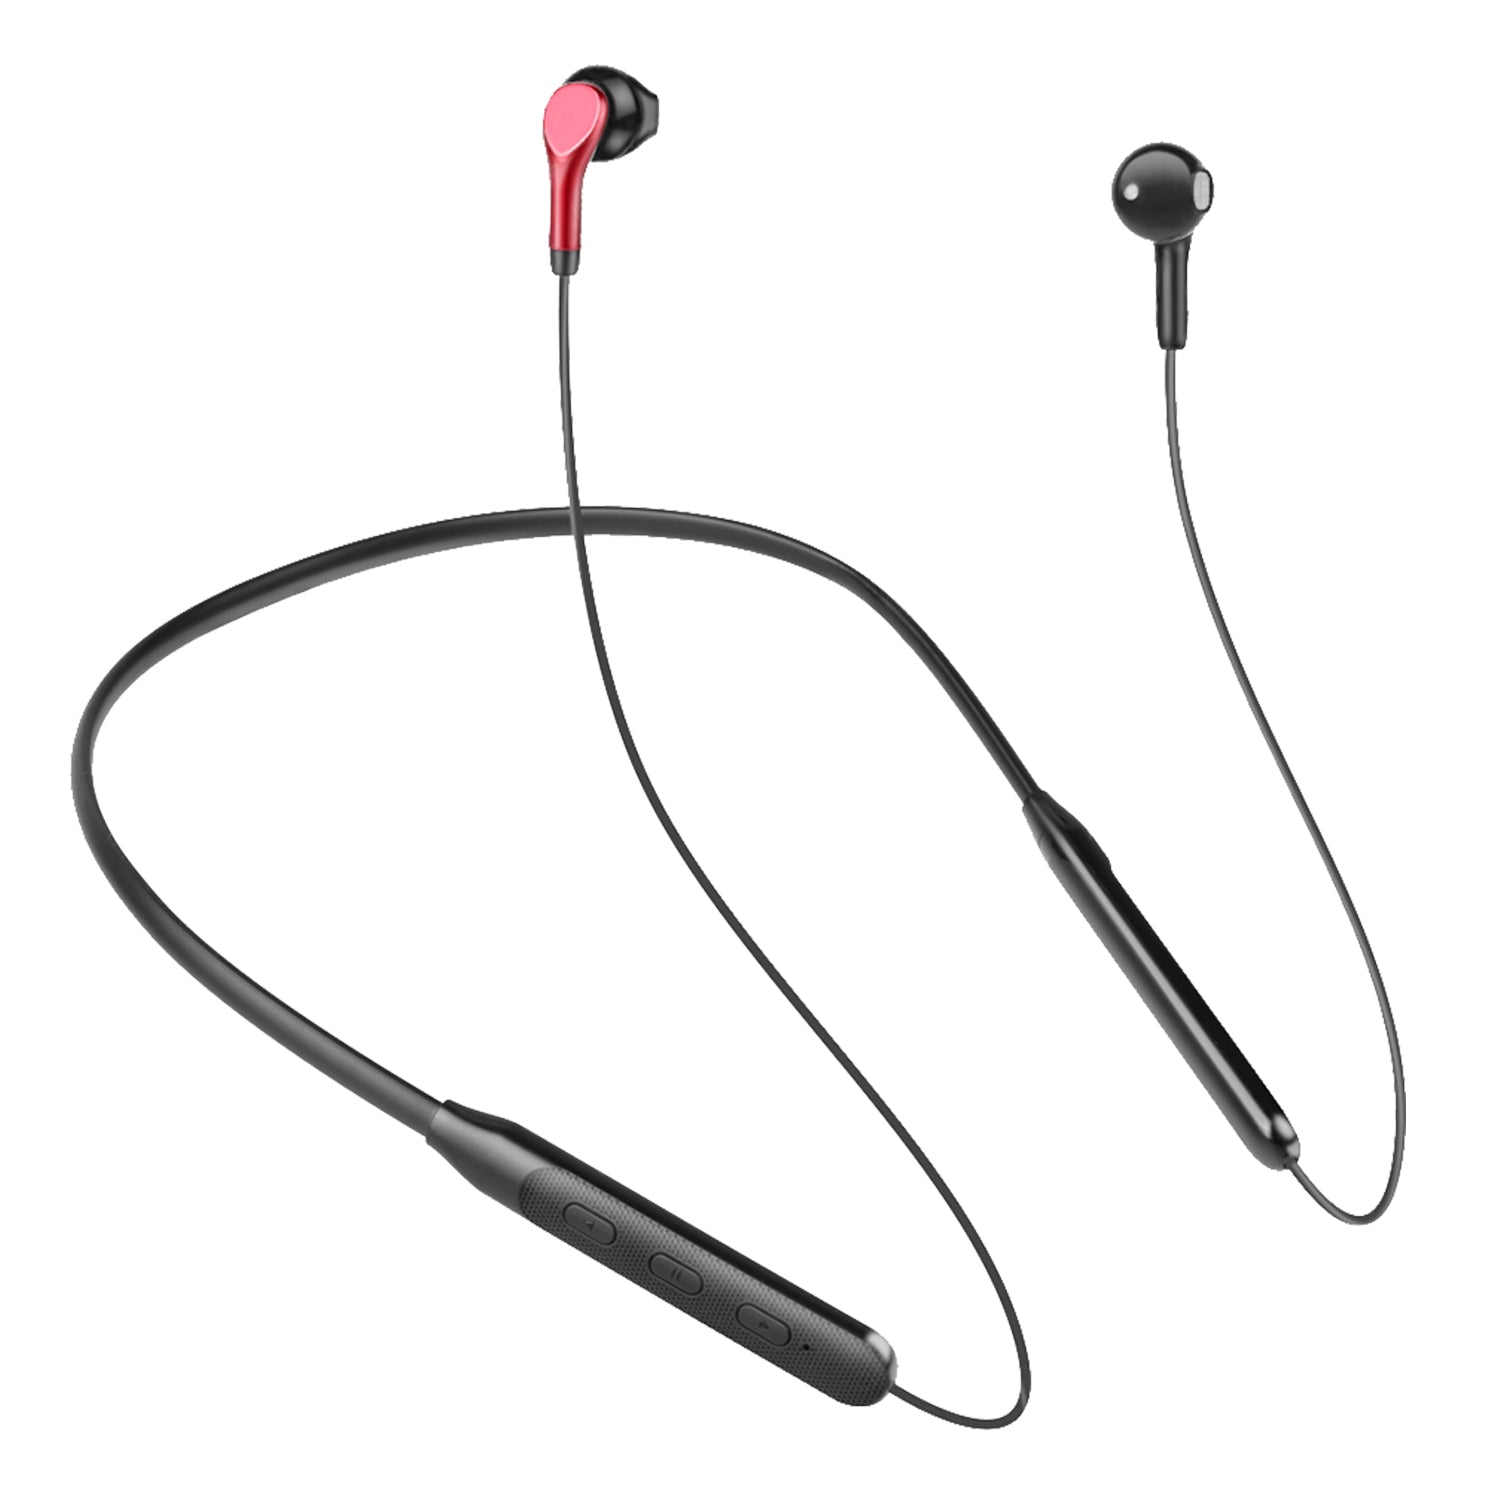 GIZMORE MN220 Wireless Bluetooth 5.0 in Ear Neckband| 20 Hours Playtime| 10 Min Charging Work Upto 2 hrs| Dual Pairing|360 Degree Surround Stereo| HD Microphone & Magnetic Earphone